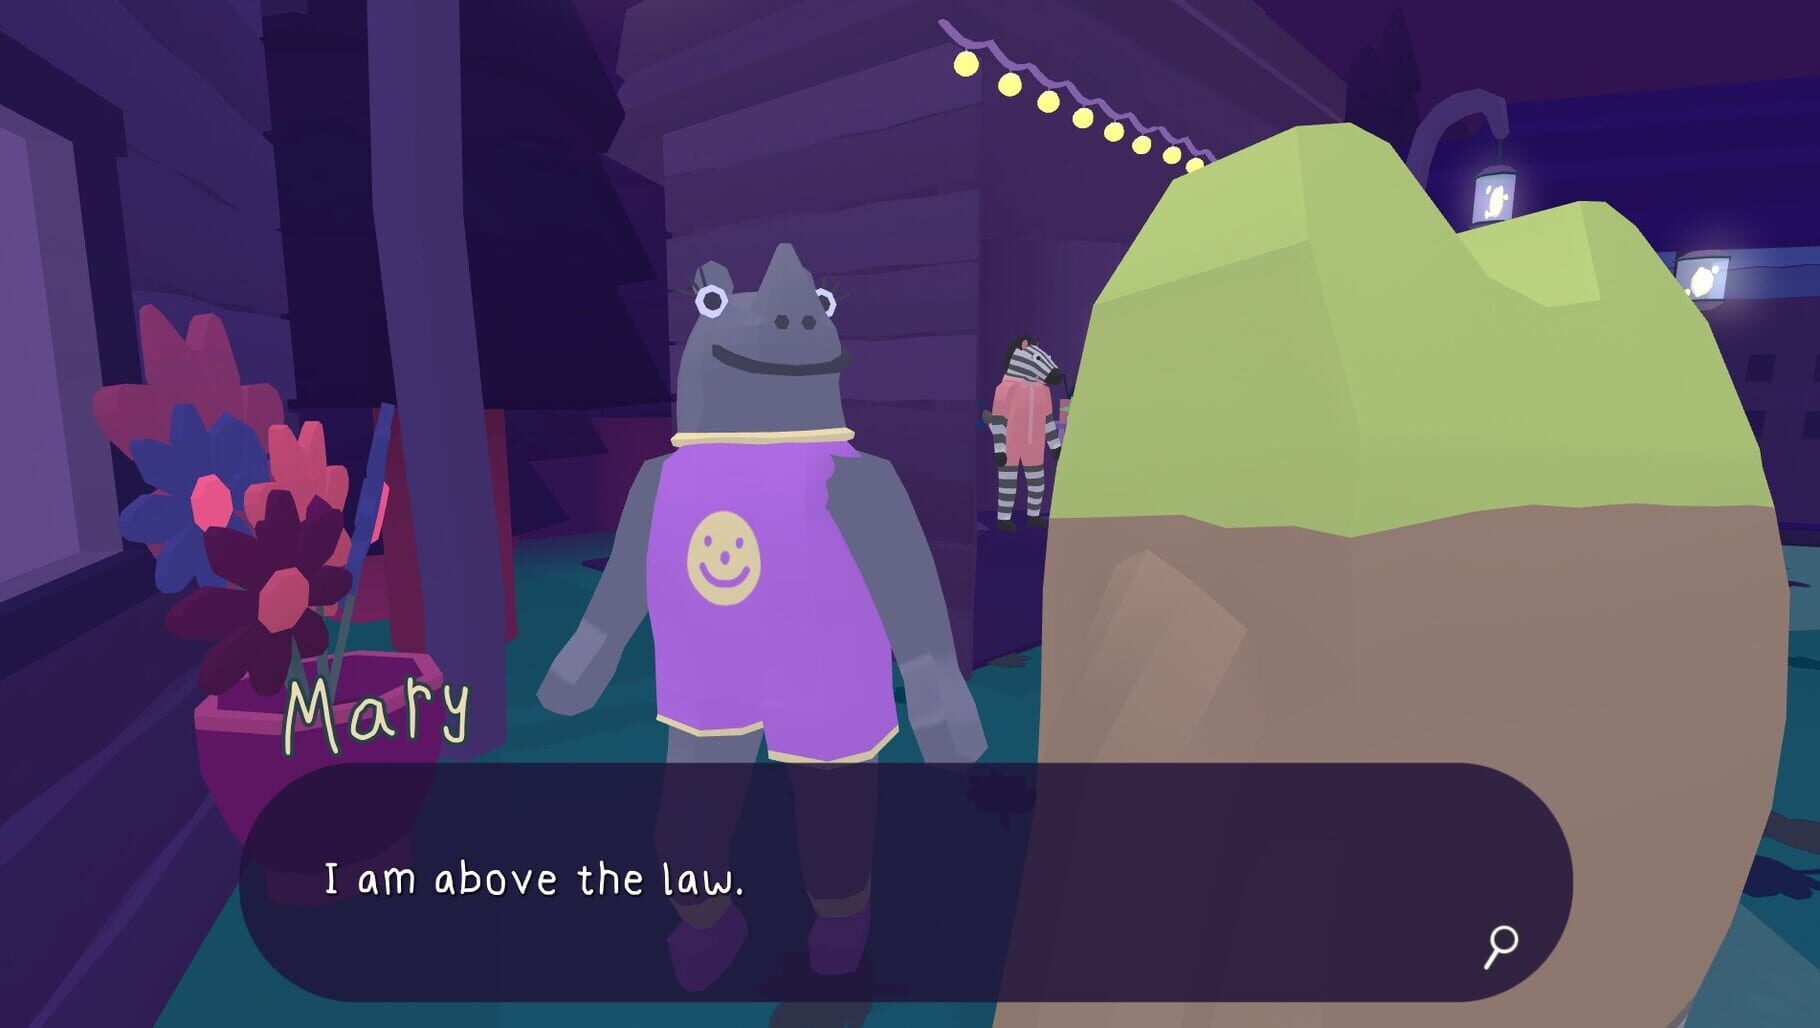 Frog Detective: The Entire Mystery screenshots